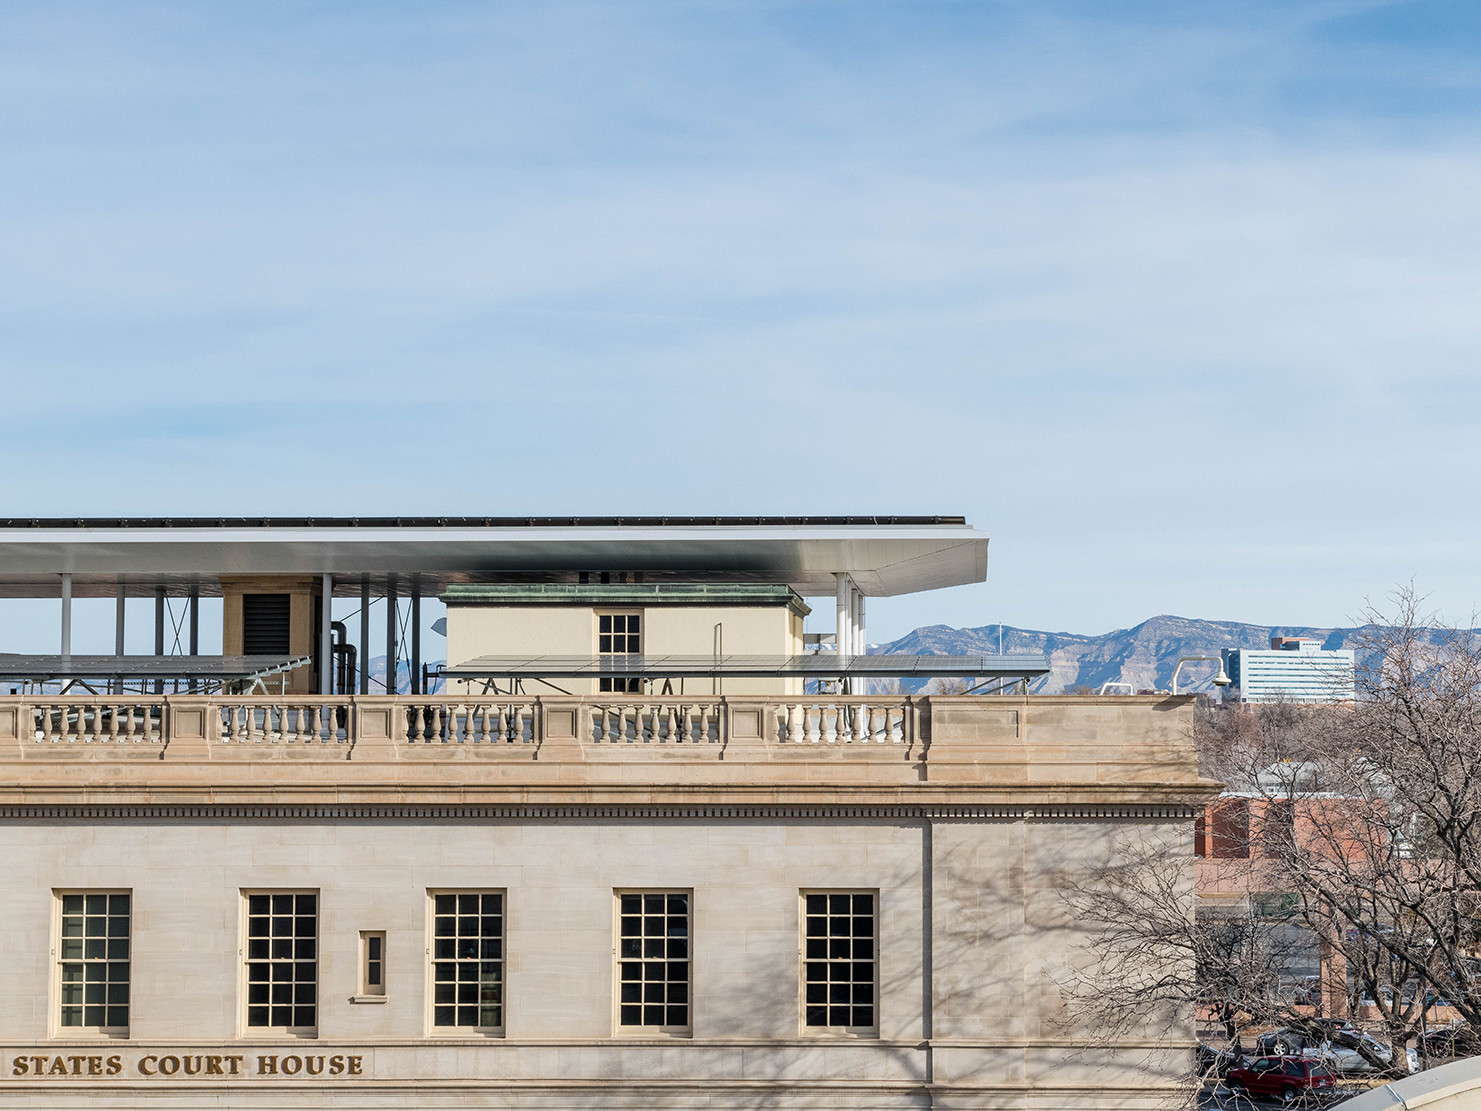 tan stone building with parapet and balustrade and rooftop mounted photovoltaic solar canopy. rocky mountains in the distance